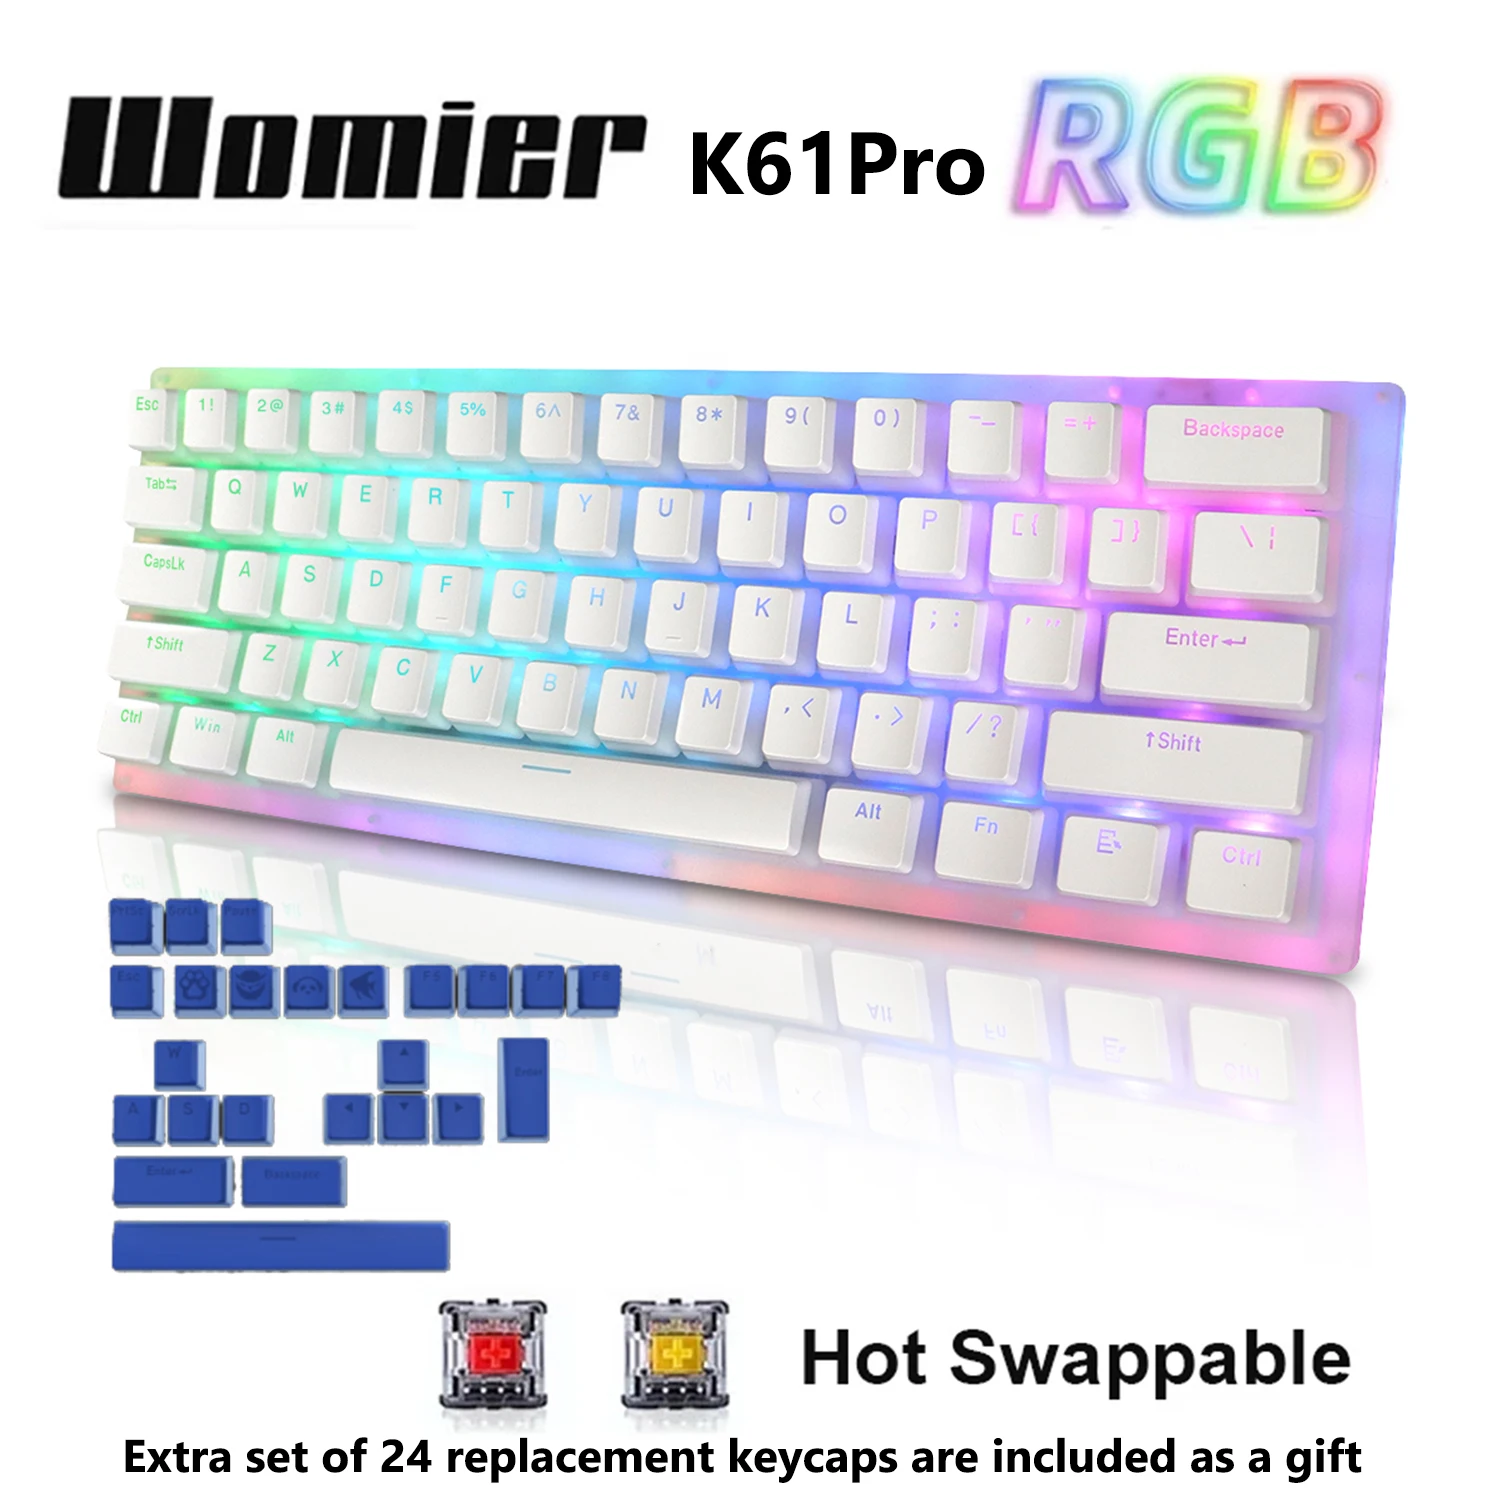 

Womier K61 PRO 60% Mechanical Keyboard Hot Swappable Gaming Keyboard Gateron Switch Dual RGB Backlit Pudding Ice Crystal Keycap